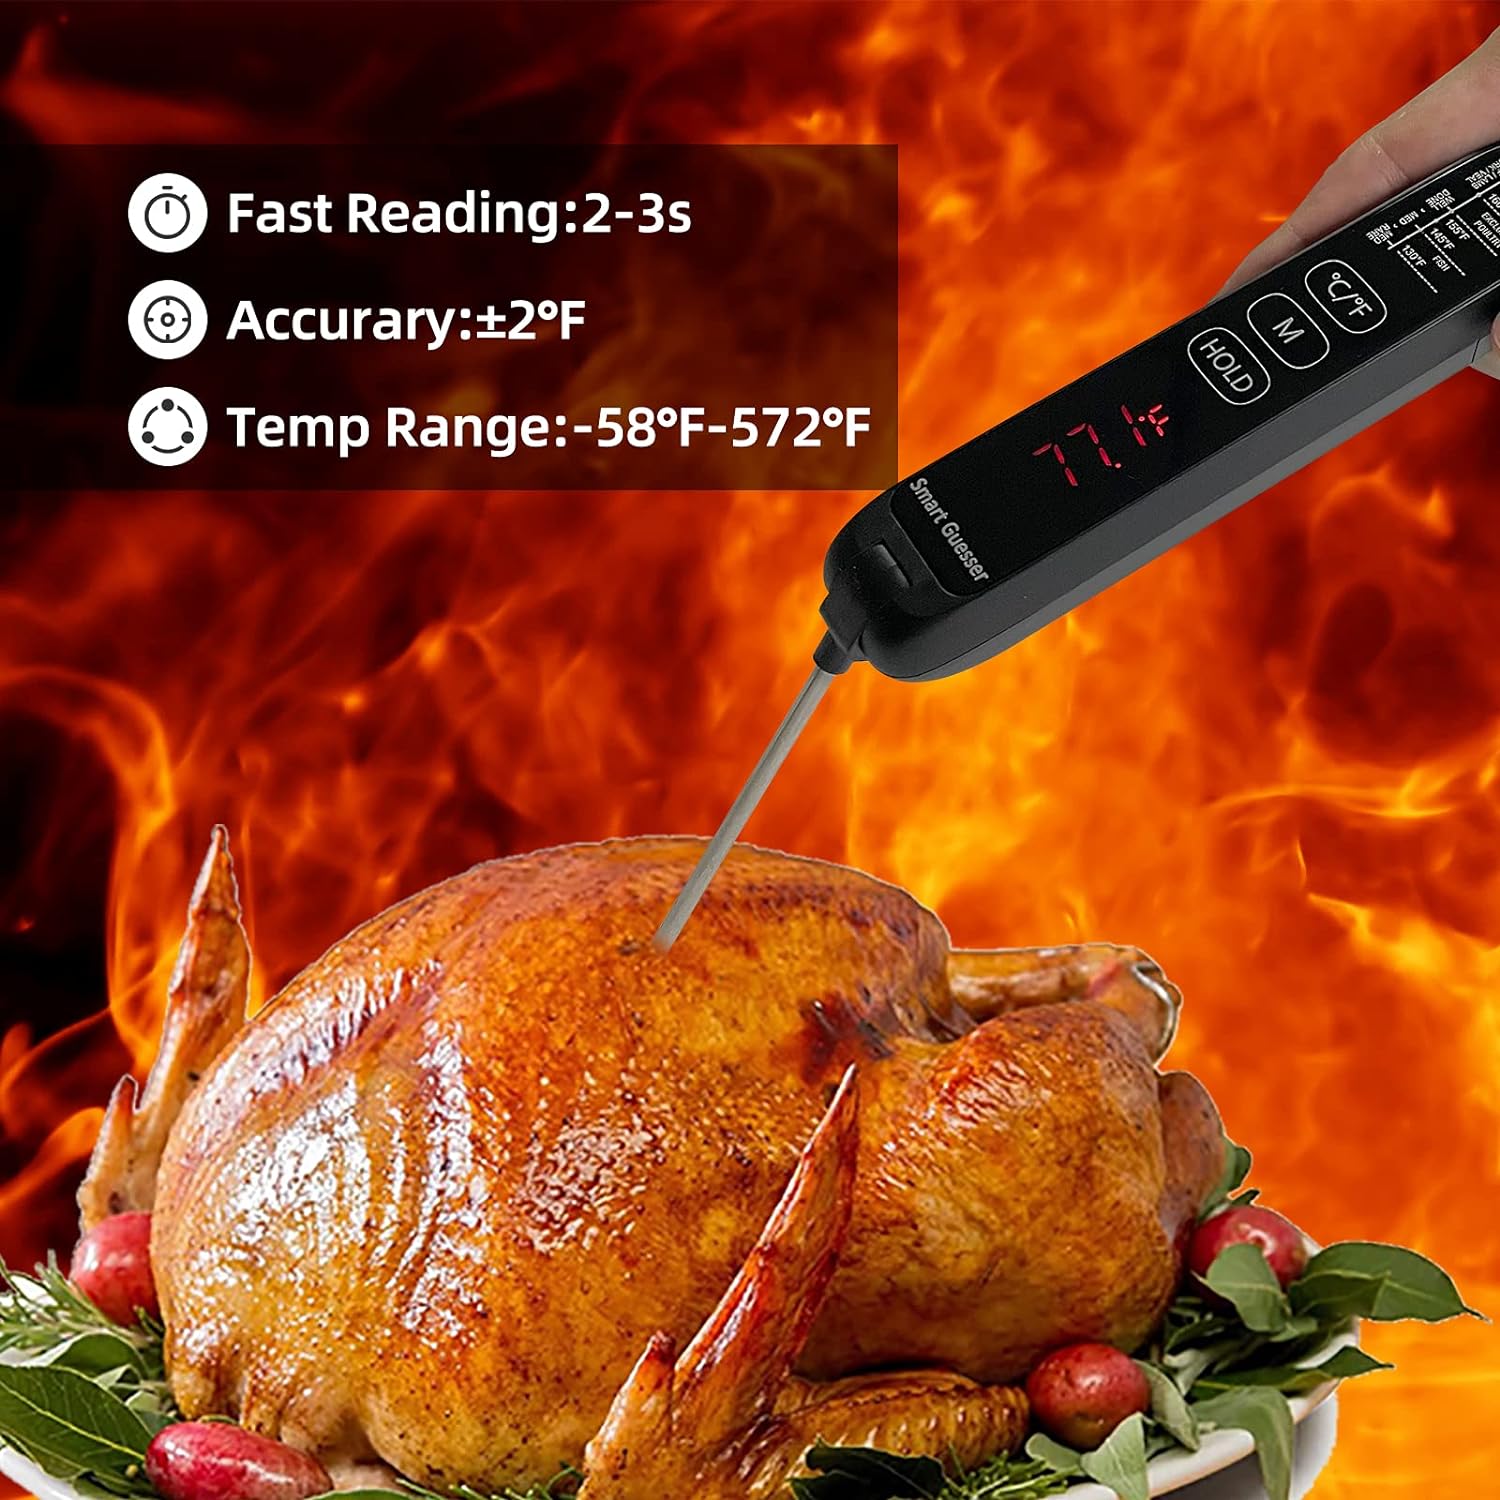 Smart Guesser Dual Probe Digital Meat Thermometer with Backlight for Kitchen Cooking, Water Proof -Extend Probe for Oven-Instant Read Food Thermometer for Meat, Deep Frying, Baking,Grilling BBQ-Black